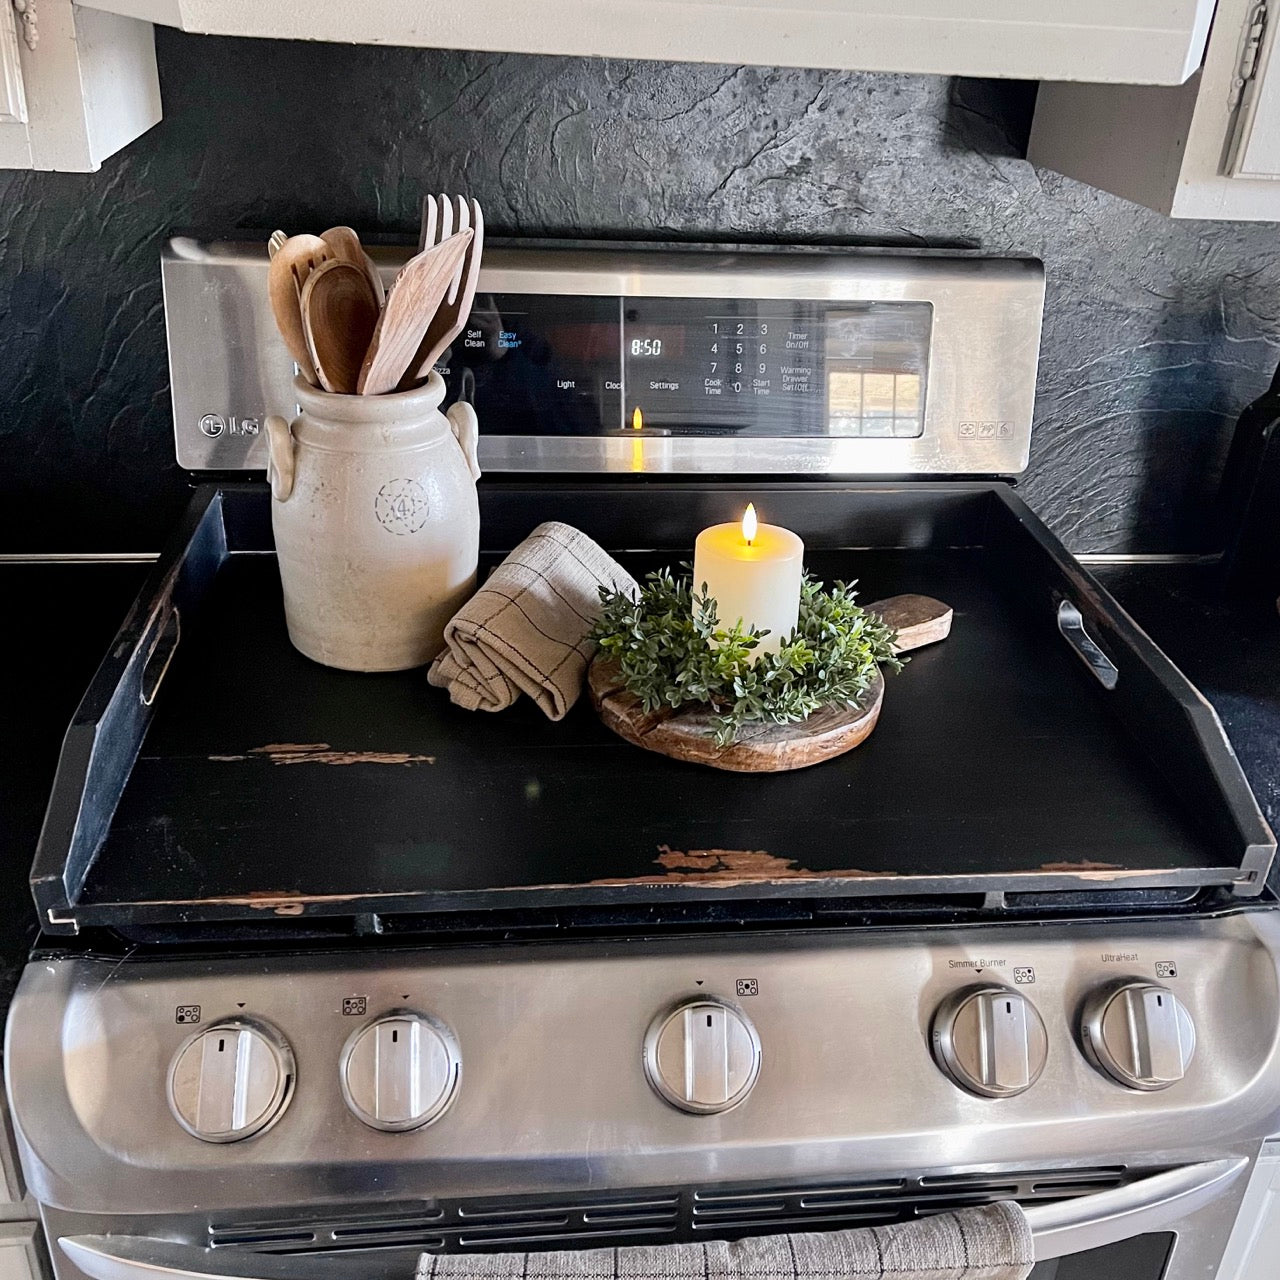 Stove Top Cover - Rustic Black w/FREE Candle Ring for Limited Time!